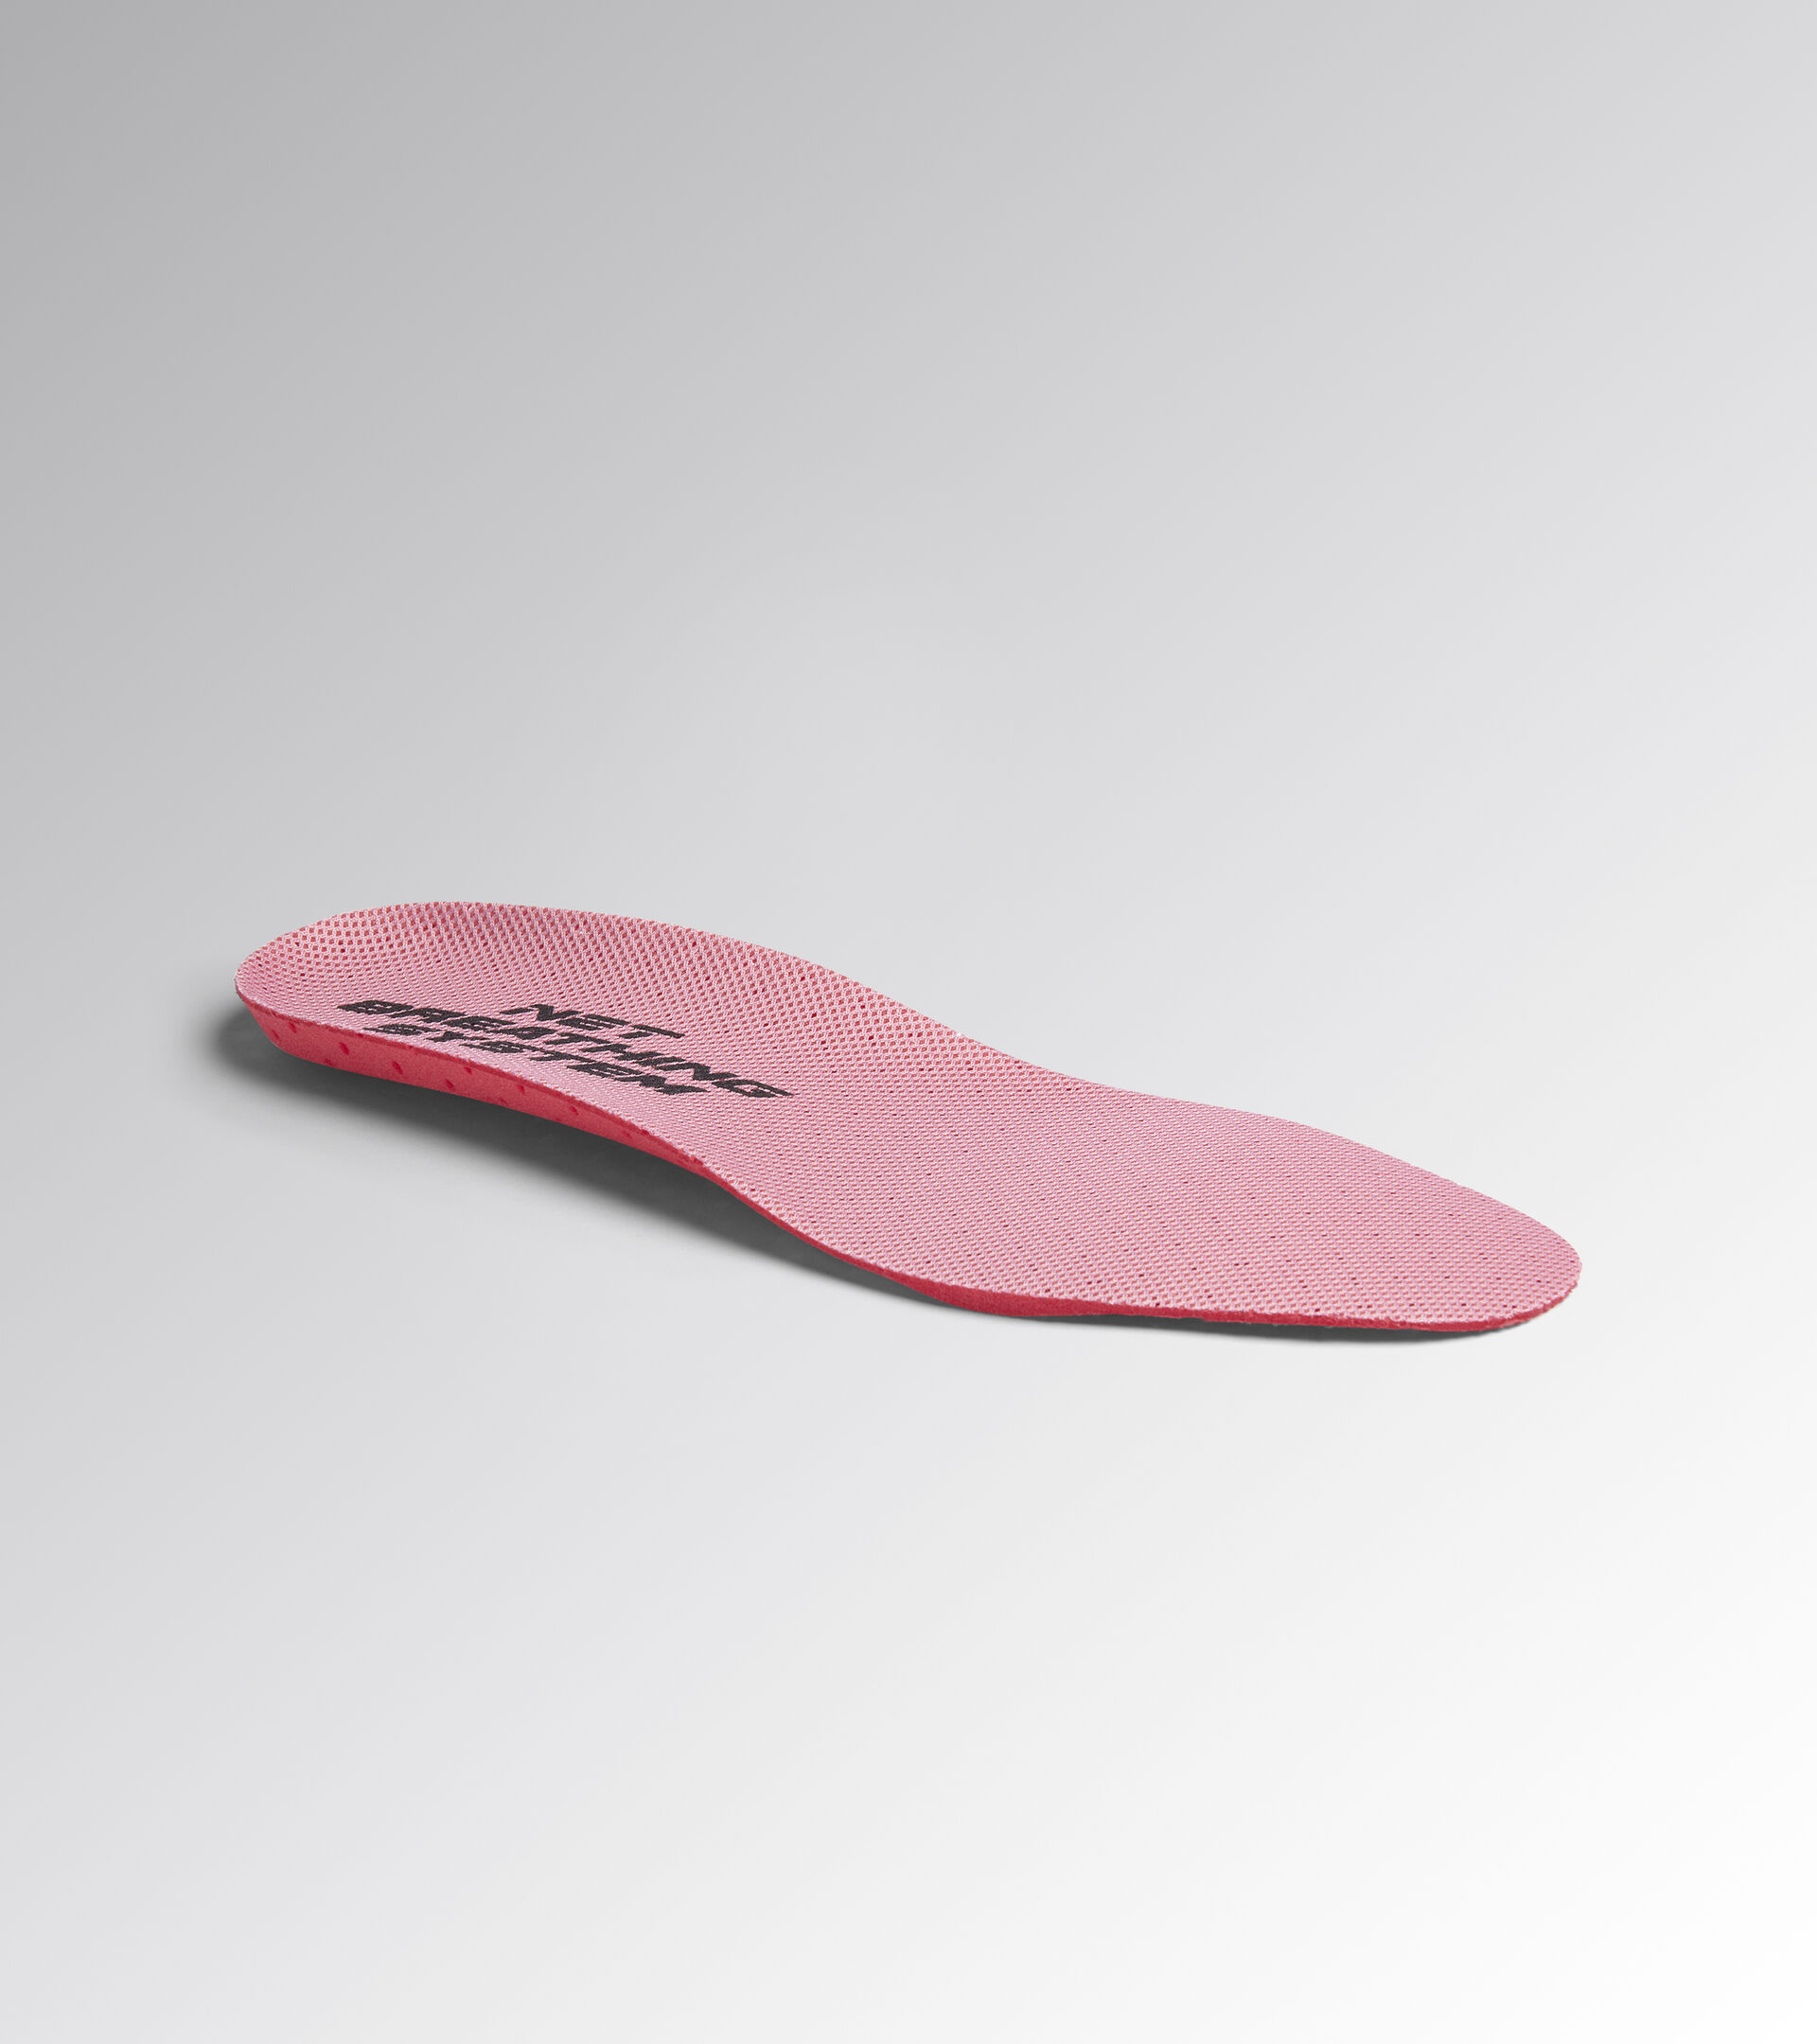 Insoles for Utility shoes INSOLE PU RUN NET SHOCKING PINK/BLACK - Utility